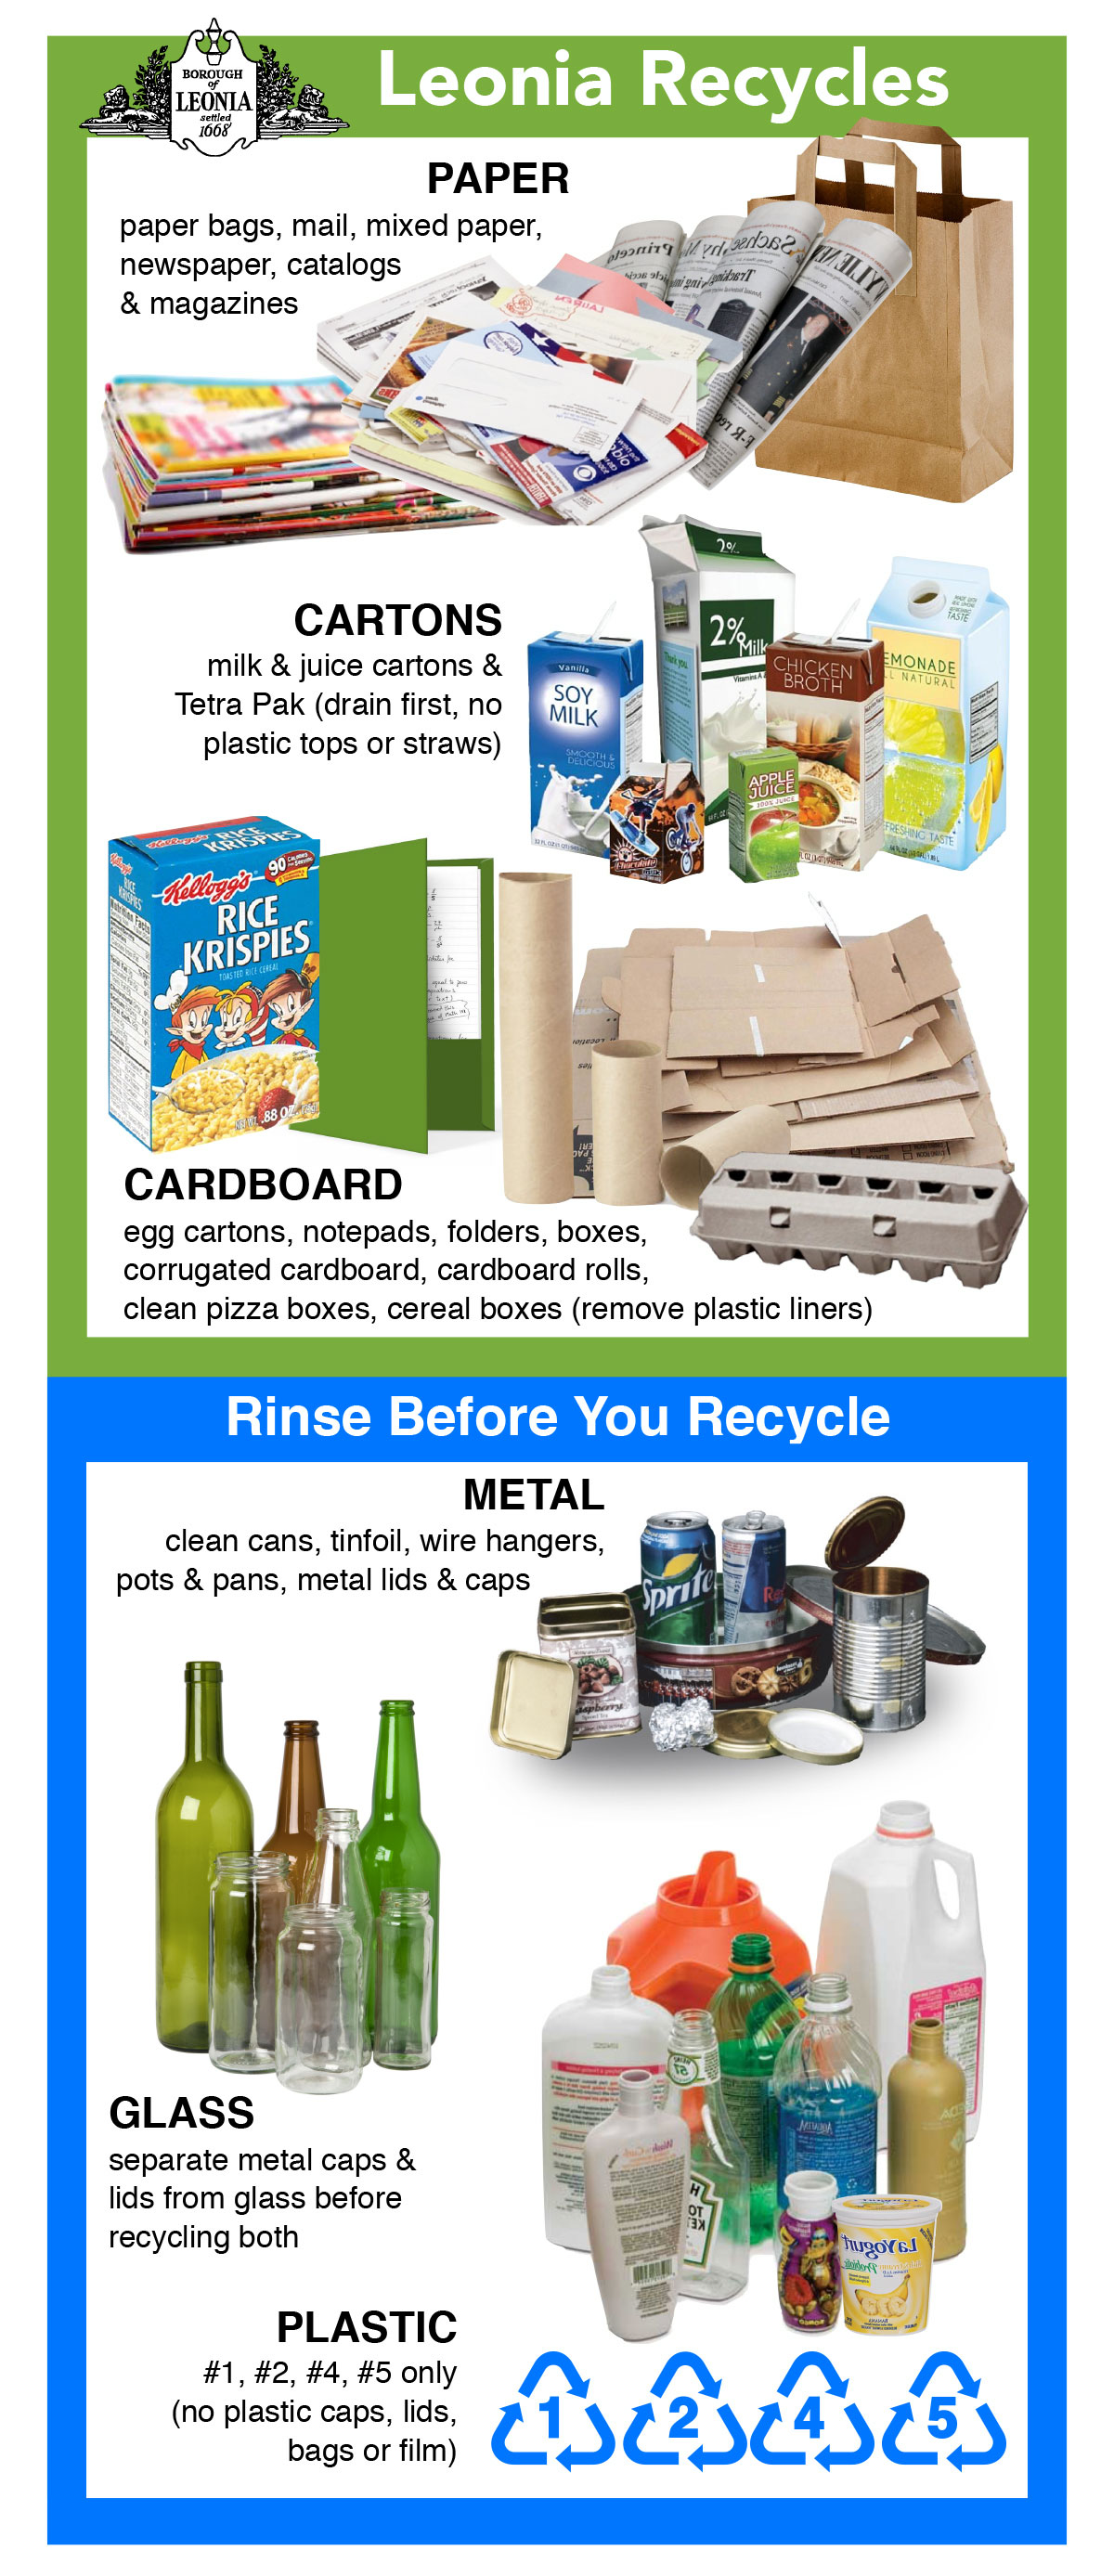 What to Recycle in Leonia